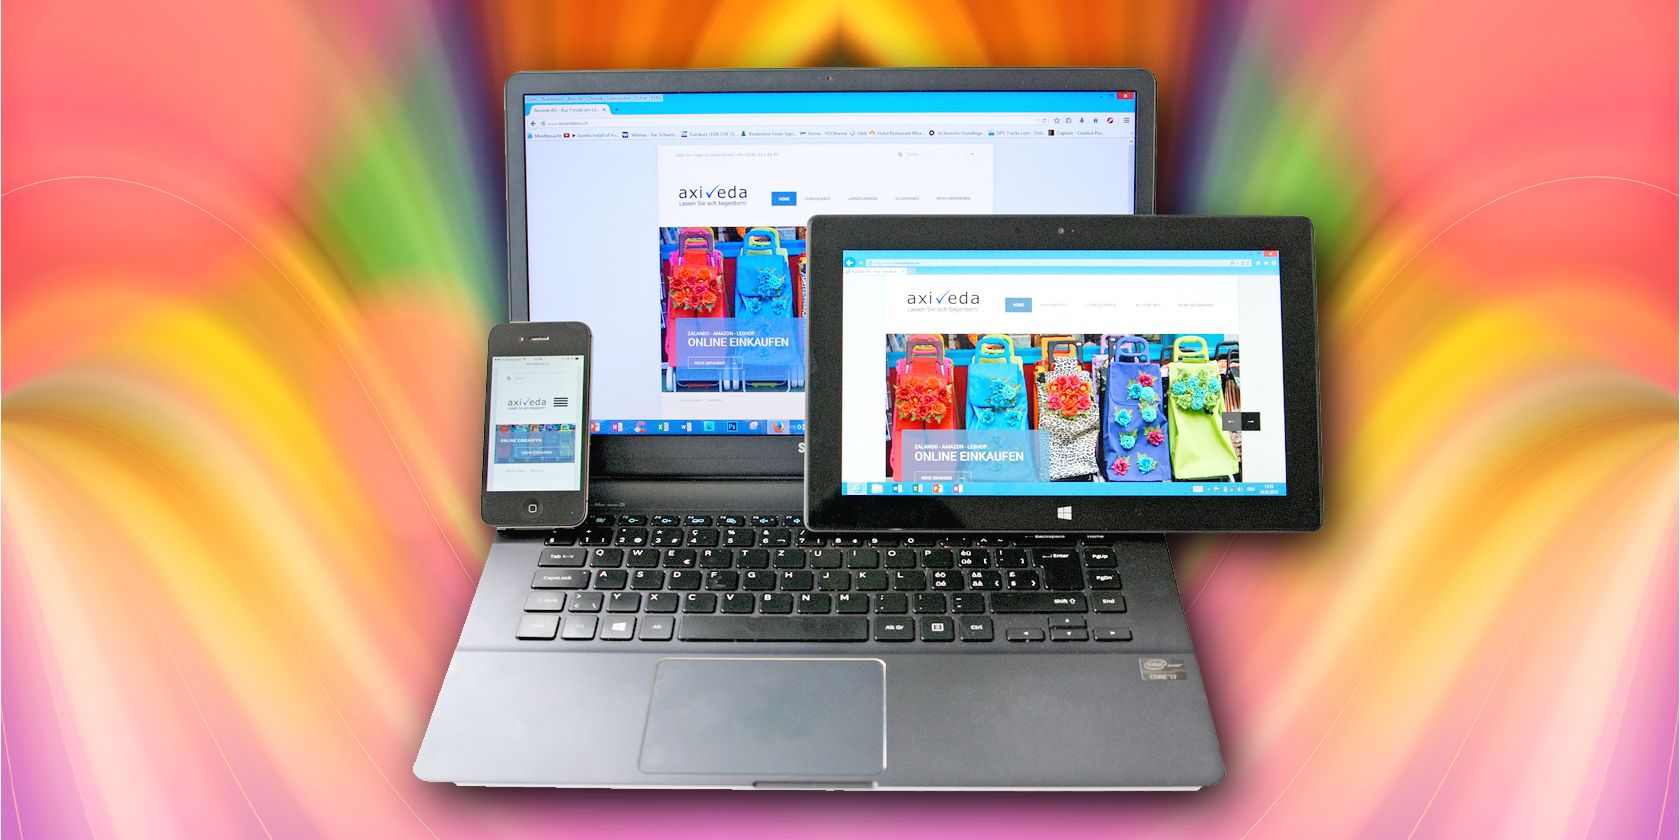 A laptop, tablet, and smartphone in front of a colorful background